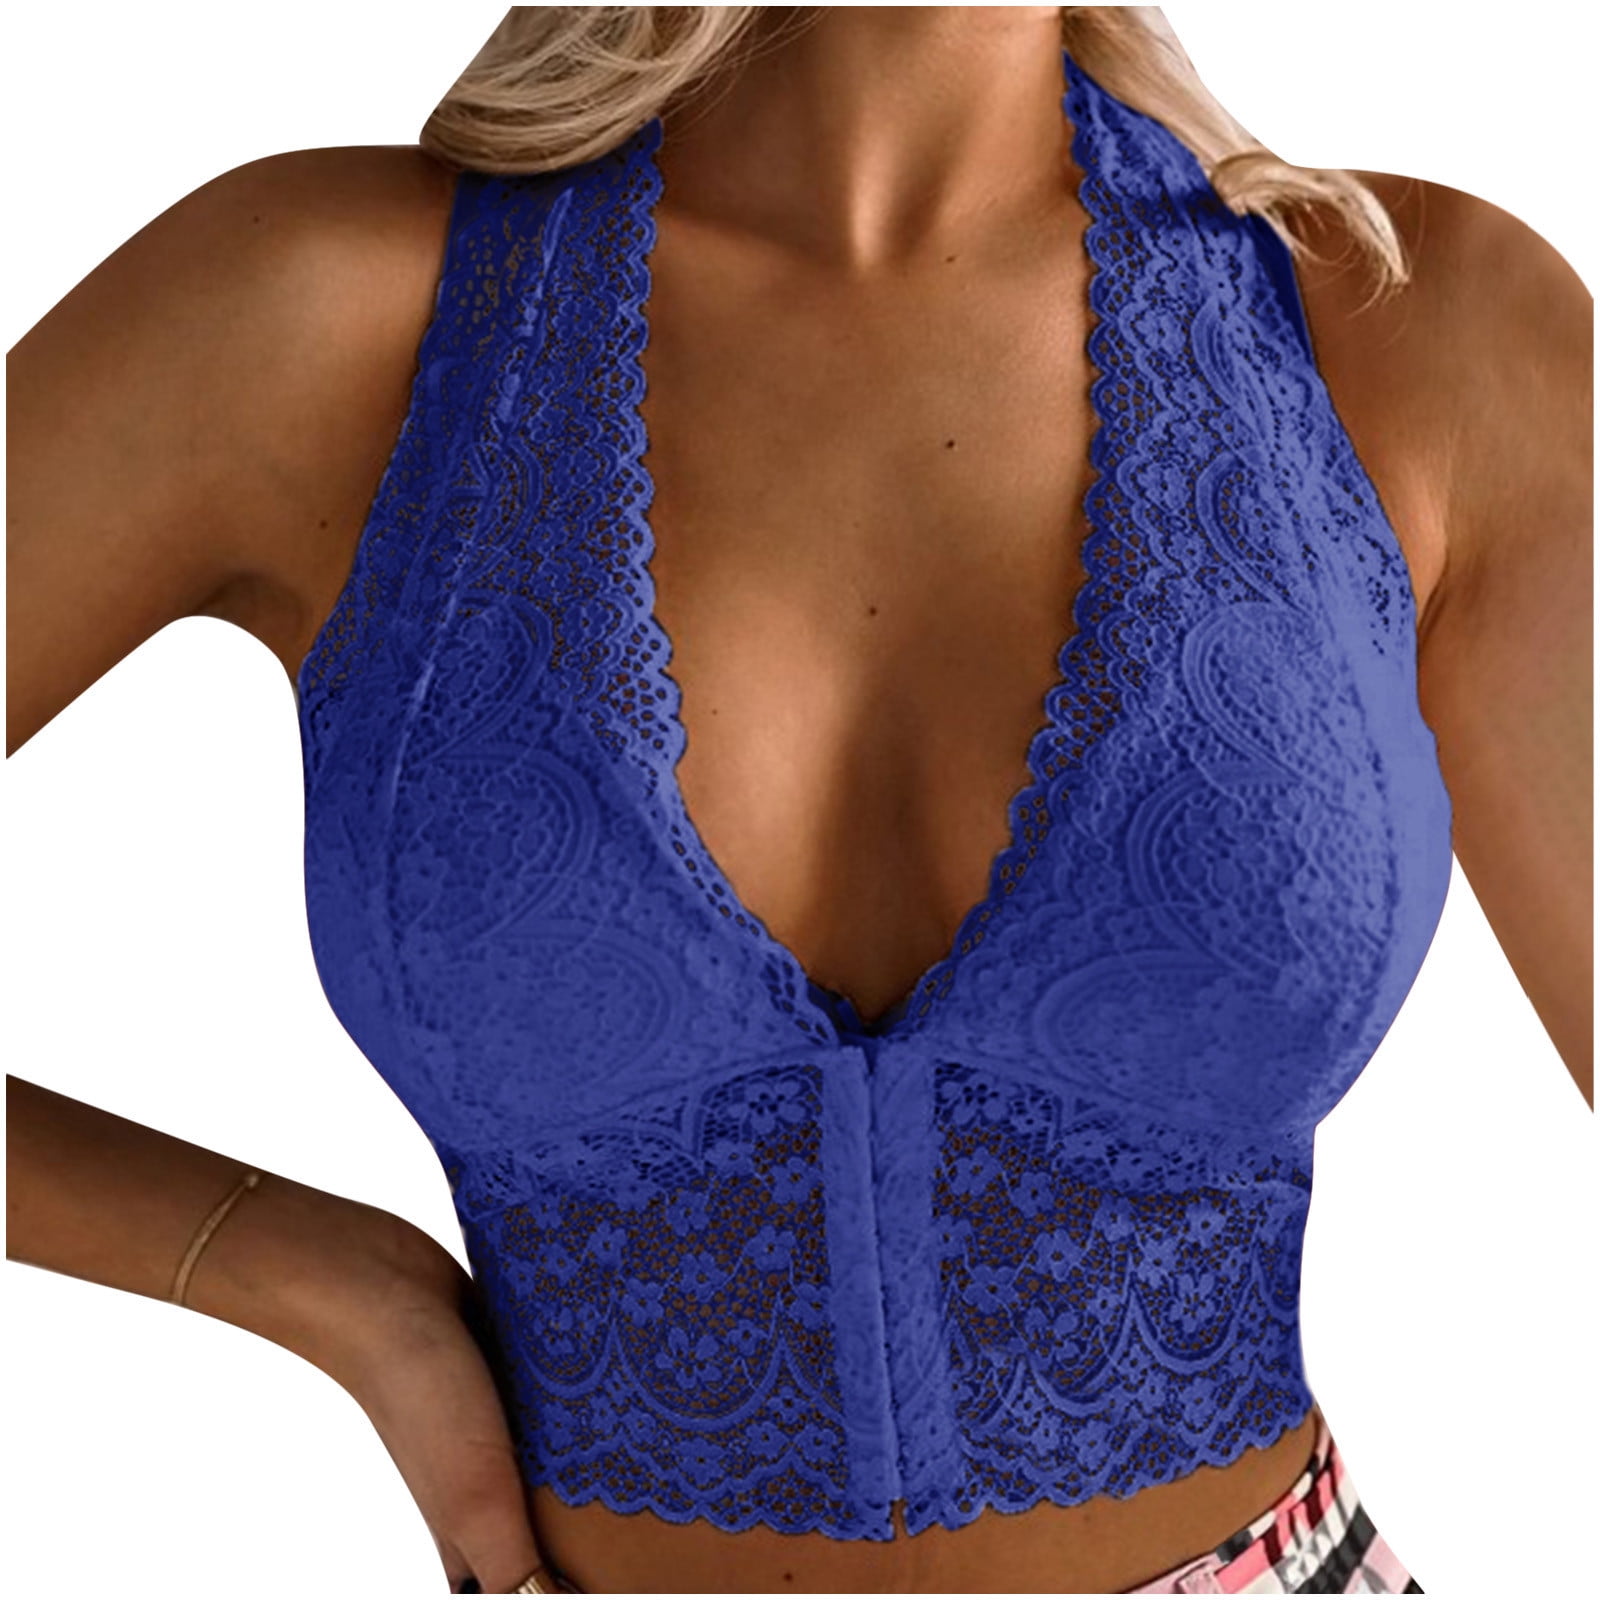 Floral Lace Deep V Neck Crop Top With Push Up Bra And Unpadded Halter  Womens Lace Bra Top Camisole Underwear From Lizhirou, $20.45